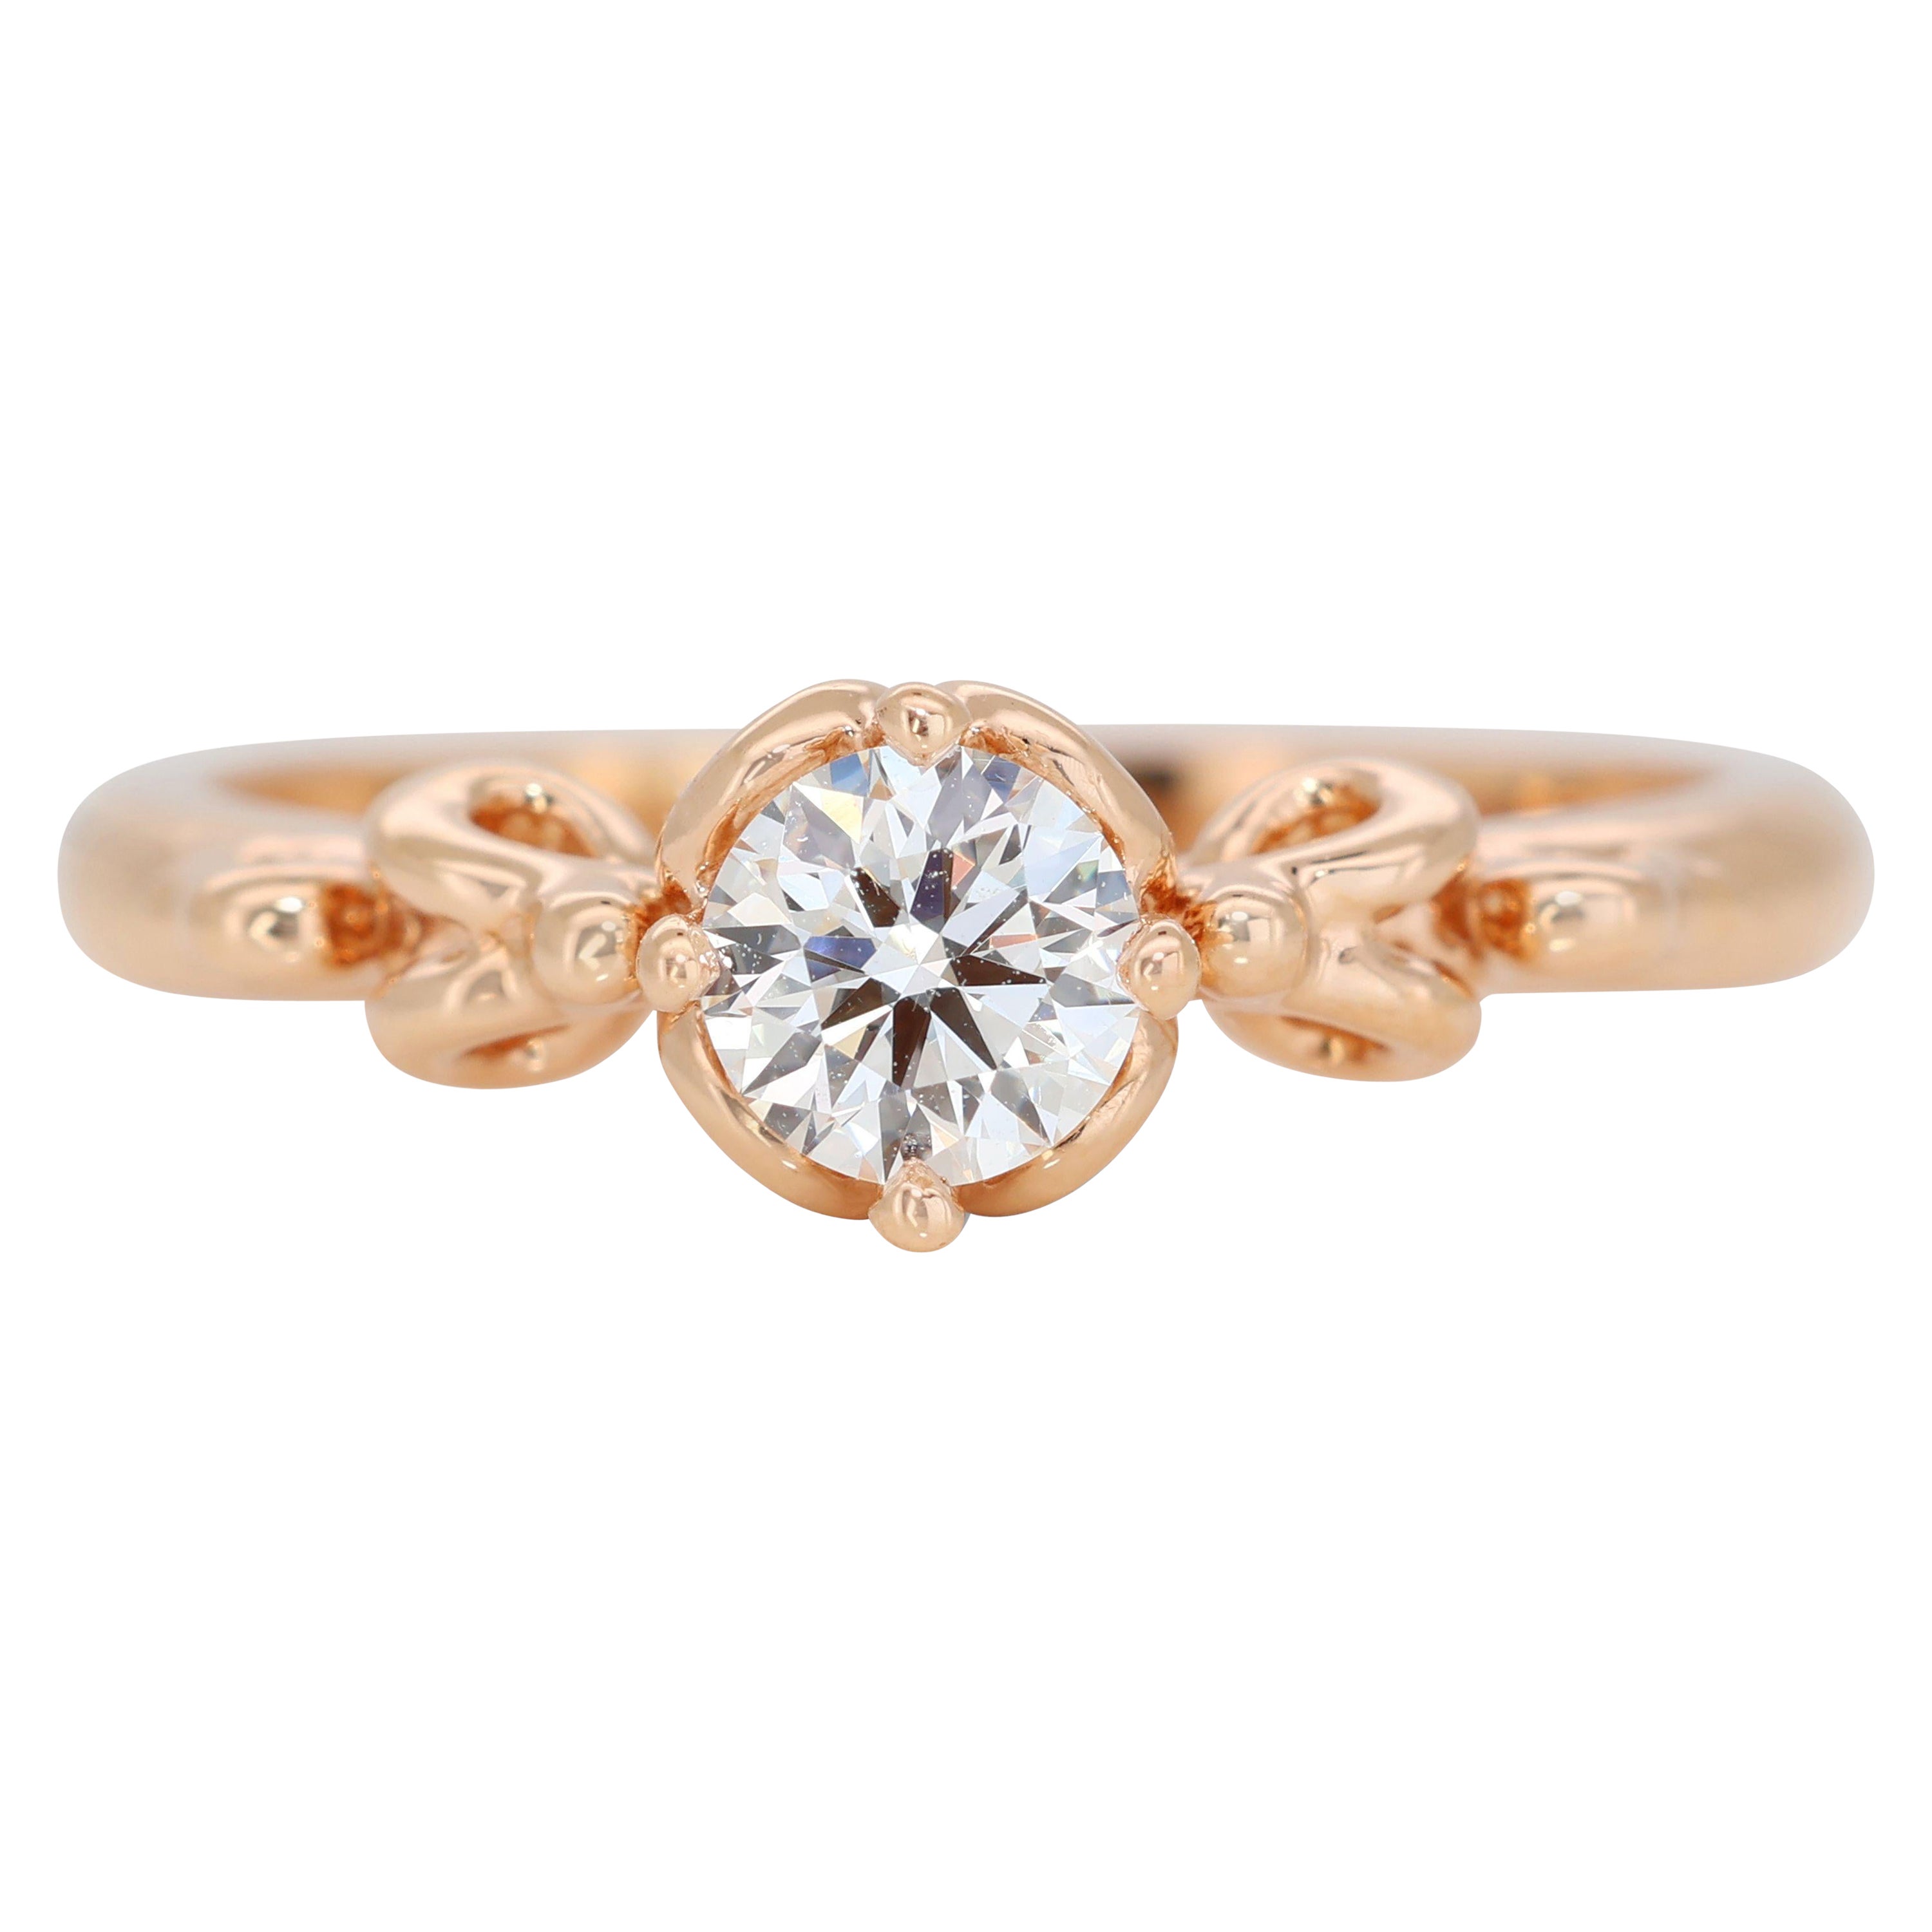 Exquisite 0.30ct Solitaire Diamond Ring set in 18K Rose Gold For Sale